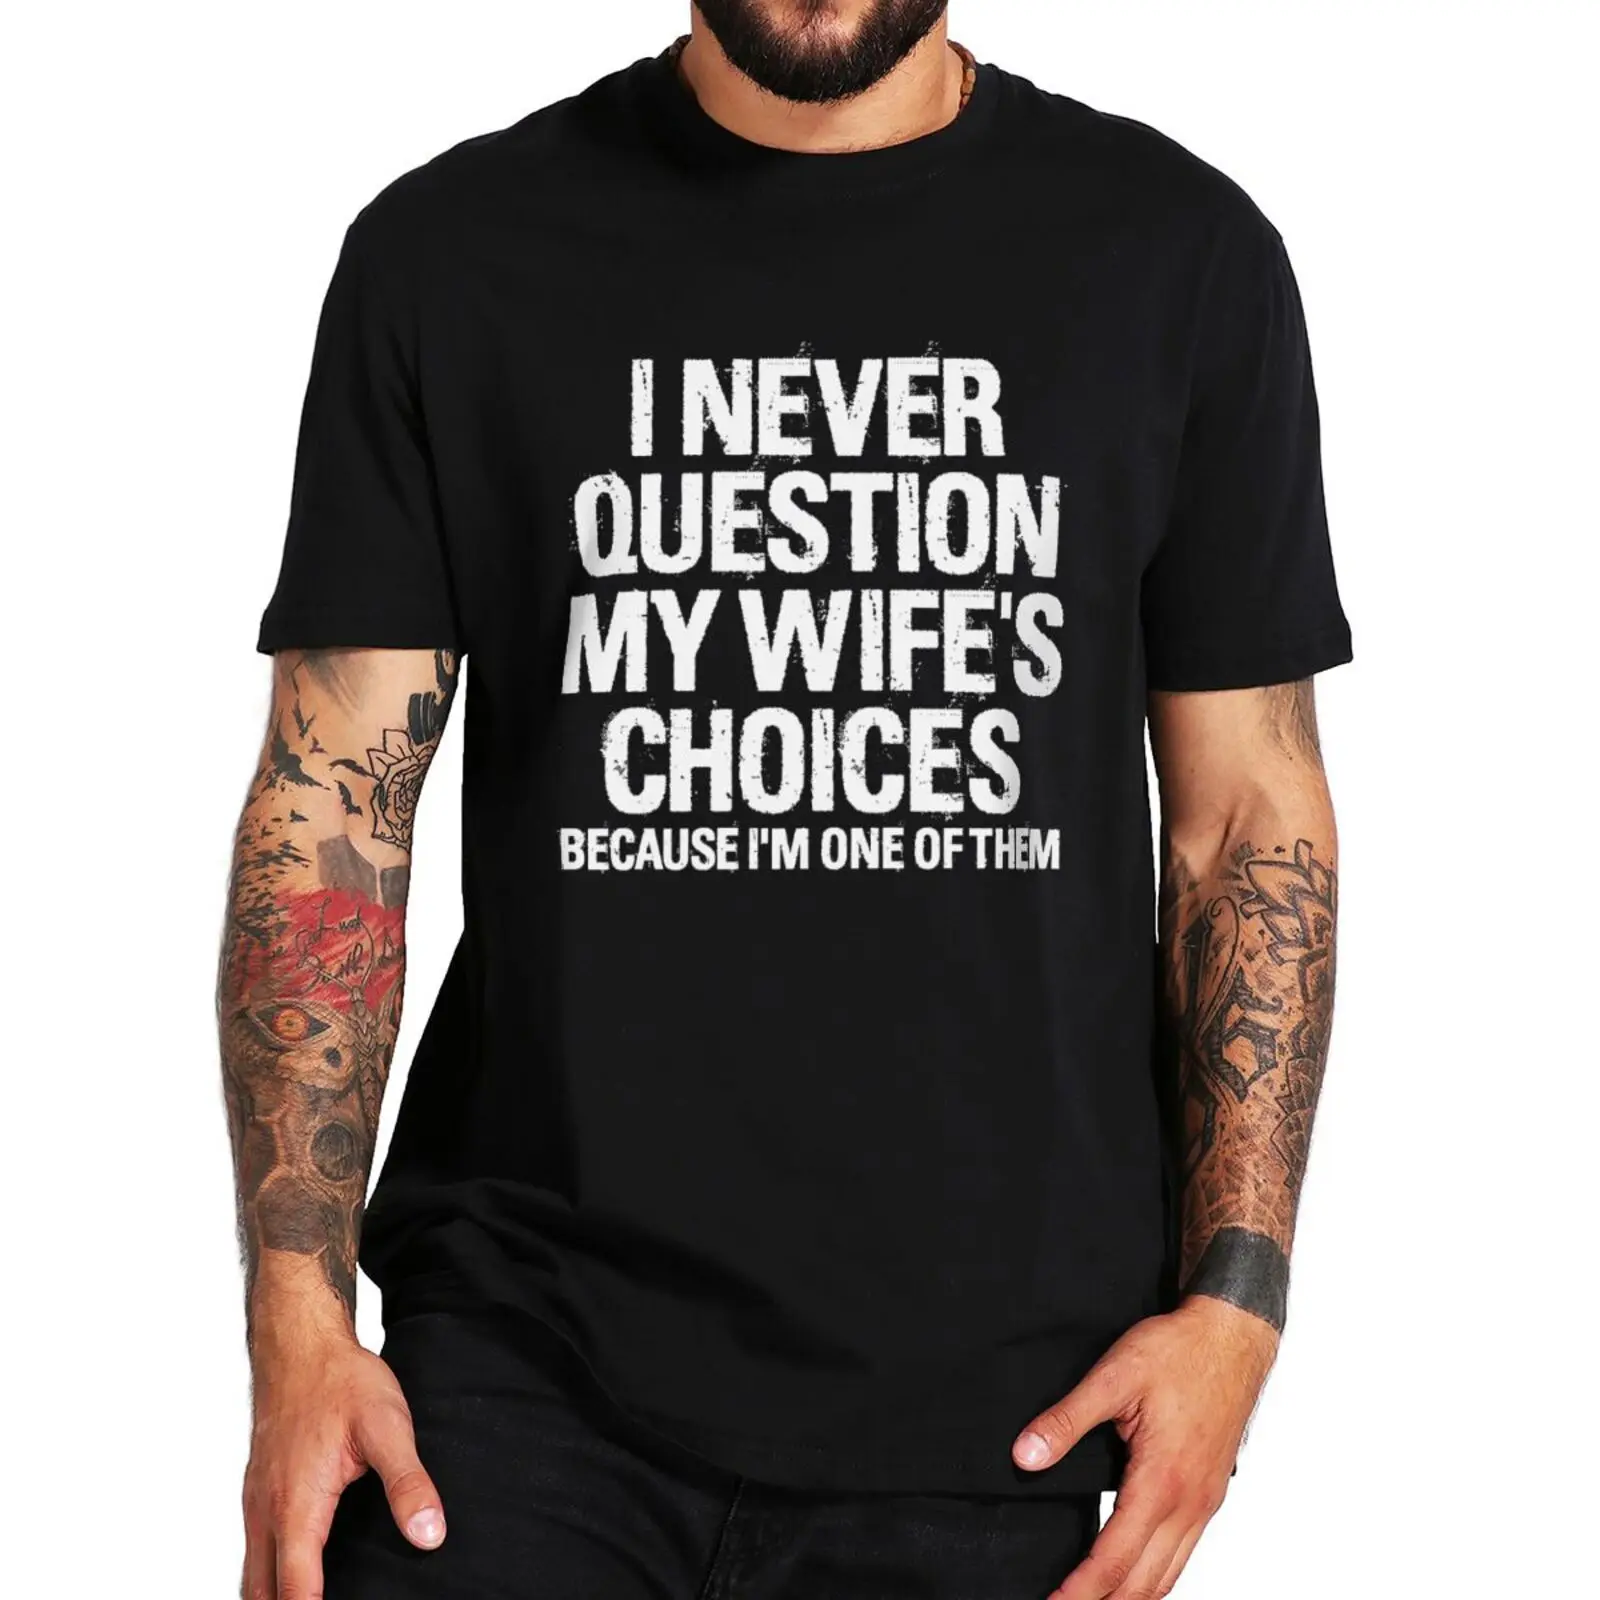 

I Never Question My Wife's Choices Funny Men's T Shirt Sarcastic Saying 100% Cotton EU Size Tshirt Birthday Gift Camiseta